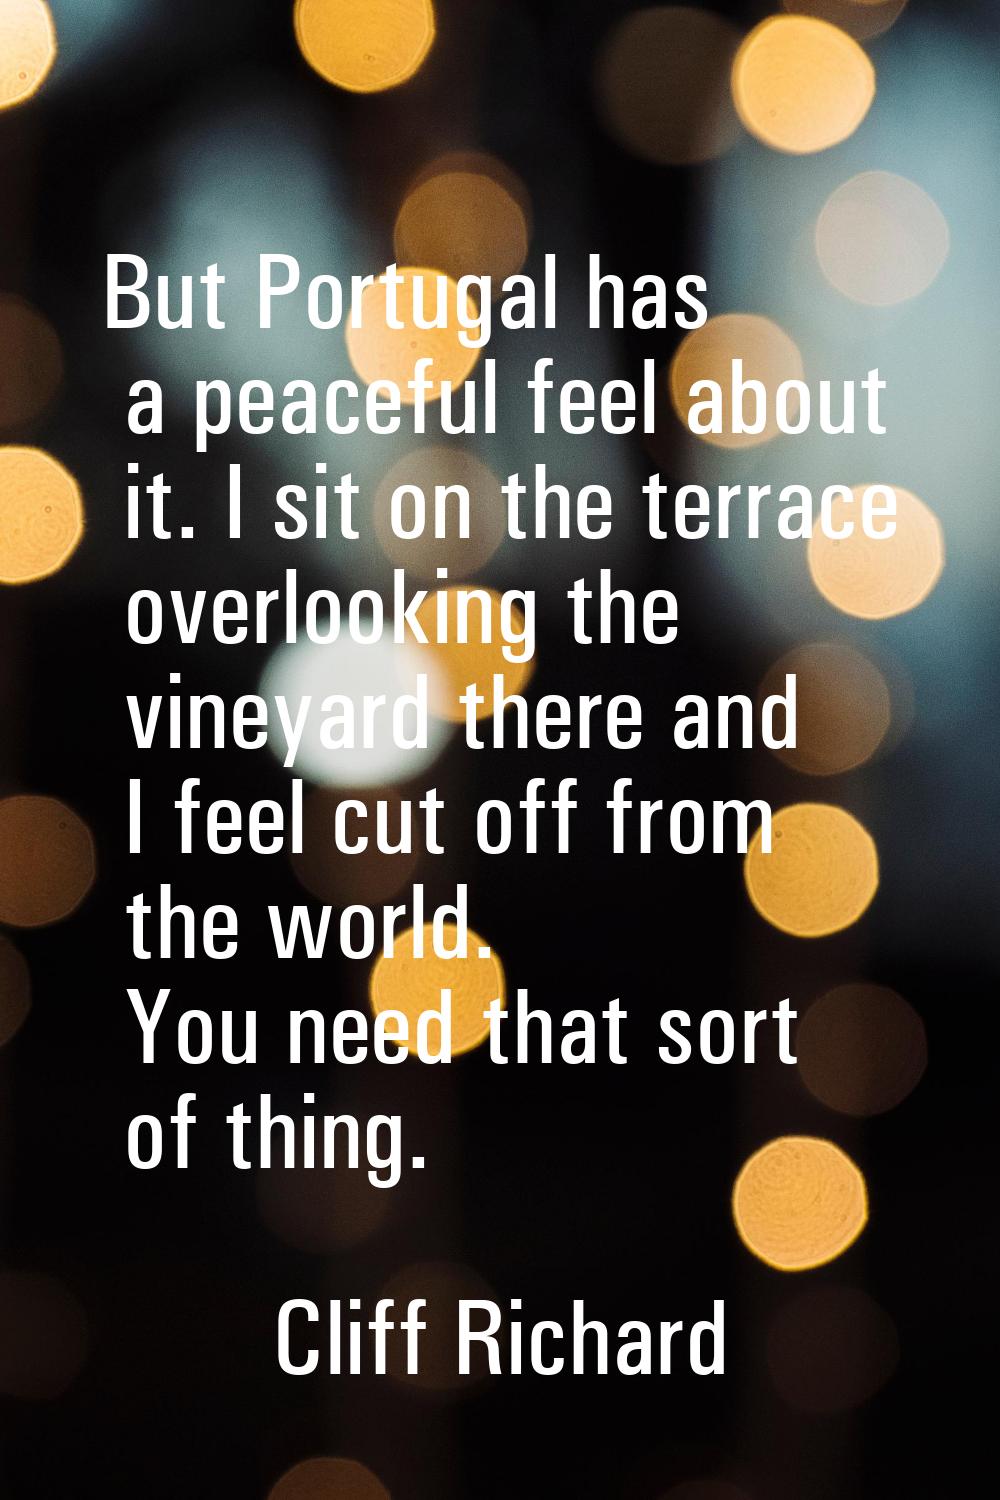 But Portugal has a peaceful feel about it. I sit on the terrace overlooking the vineyard there and 